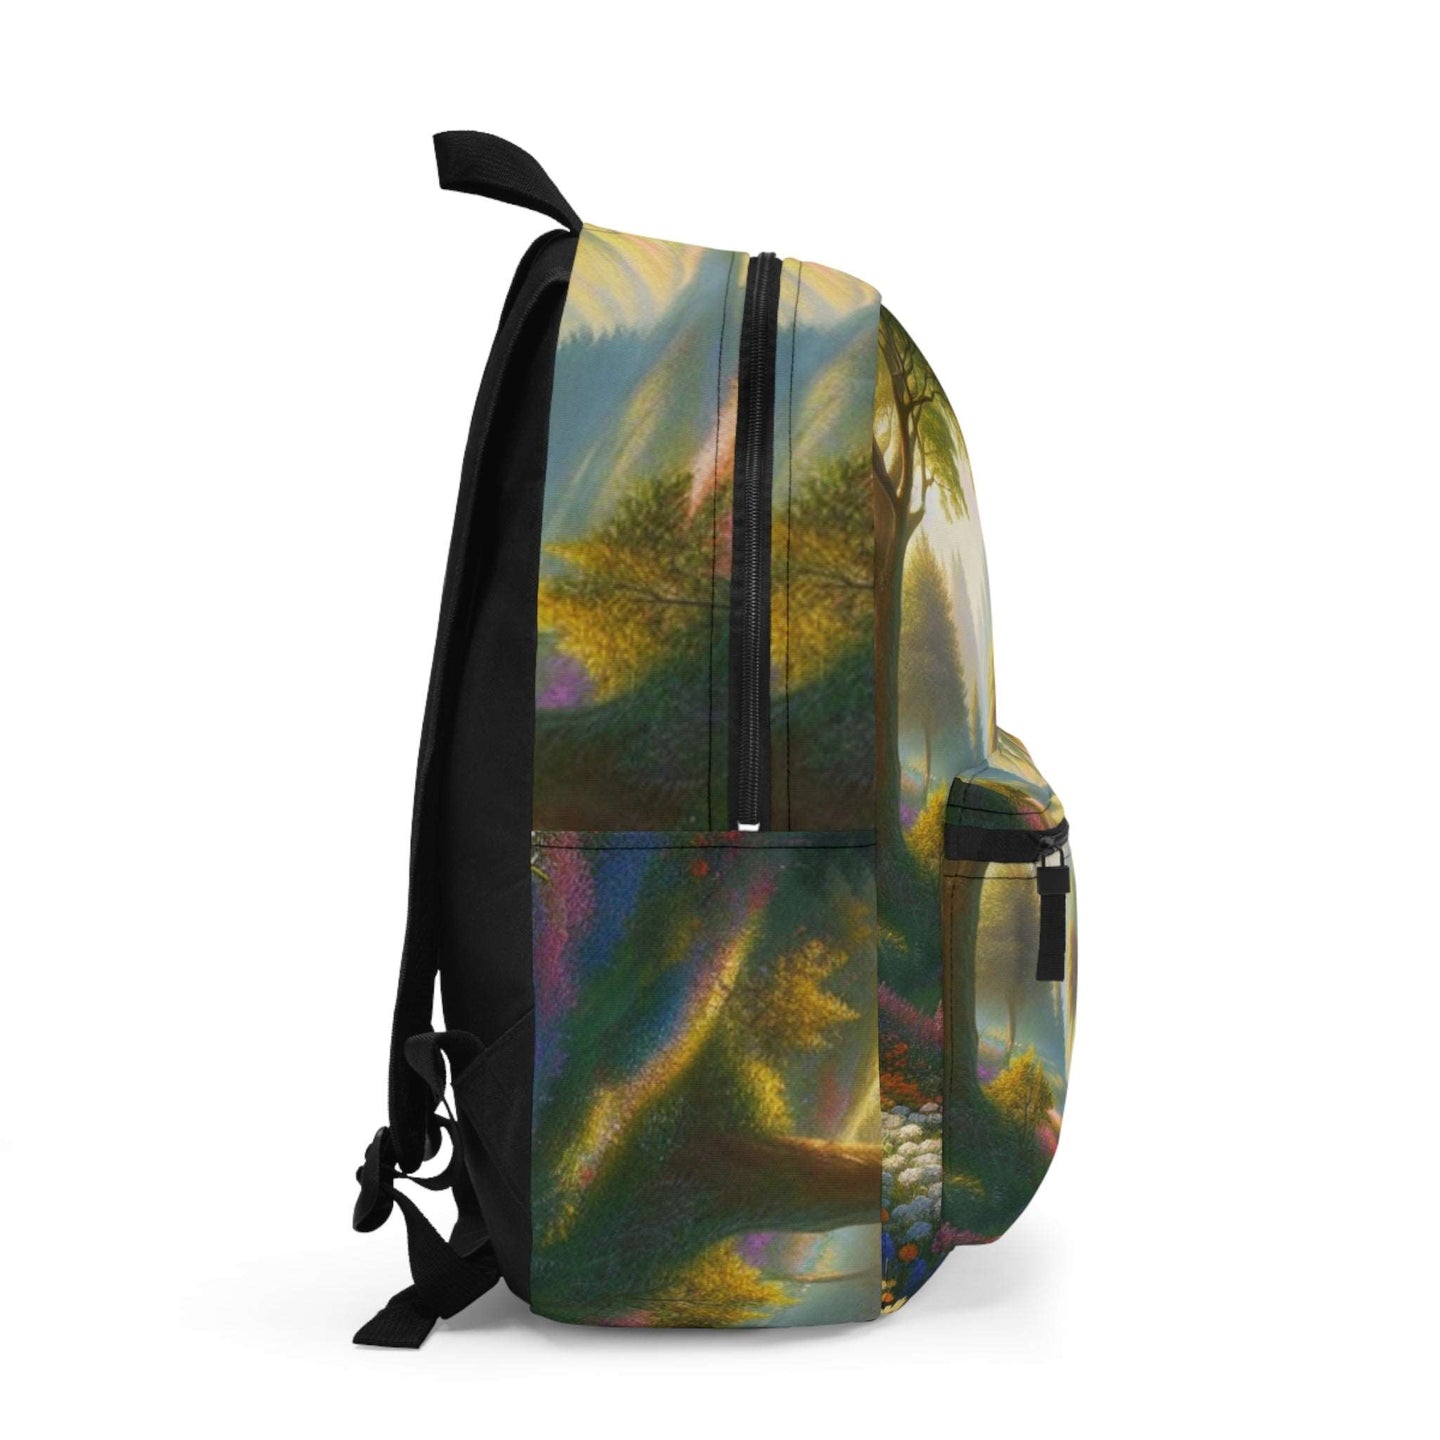 "Introducing our Blooming Meadows Collection: A Tote Bag for the Elegant, Free-Spirited Woman! Encapsulating the effervescent charm of sunlit meadows, this bag is as gorgeous and enchanting as a tranquil journey through - Backpack